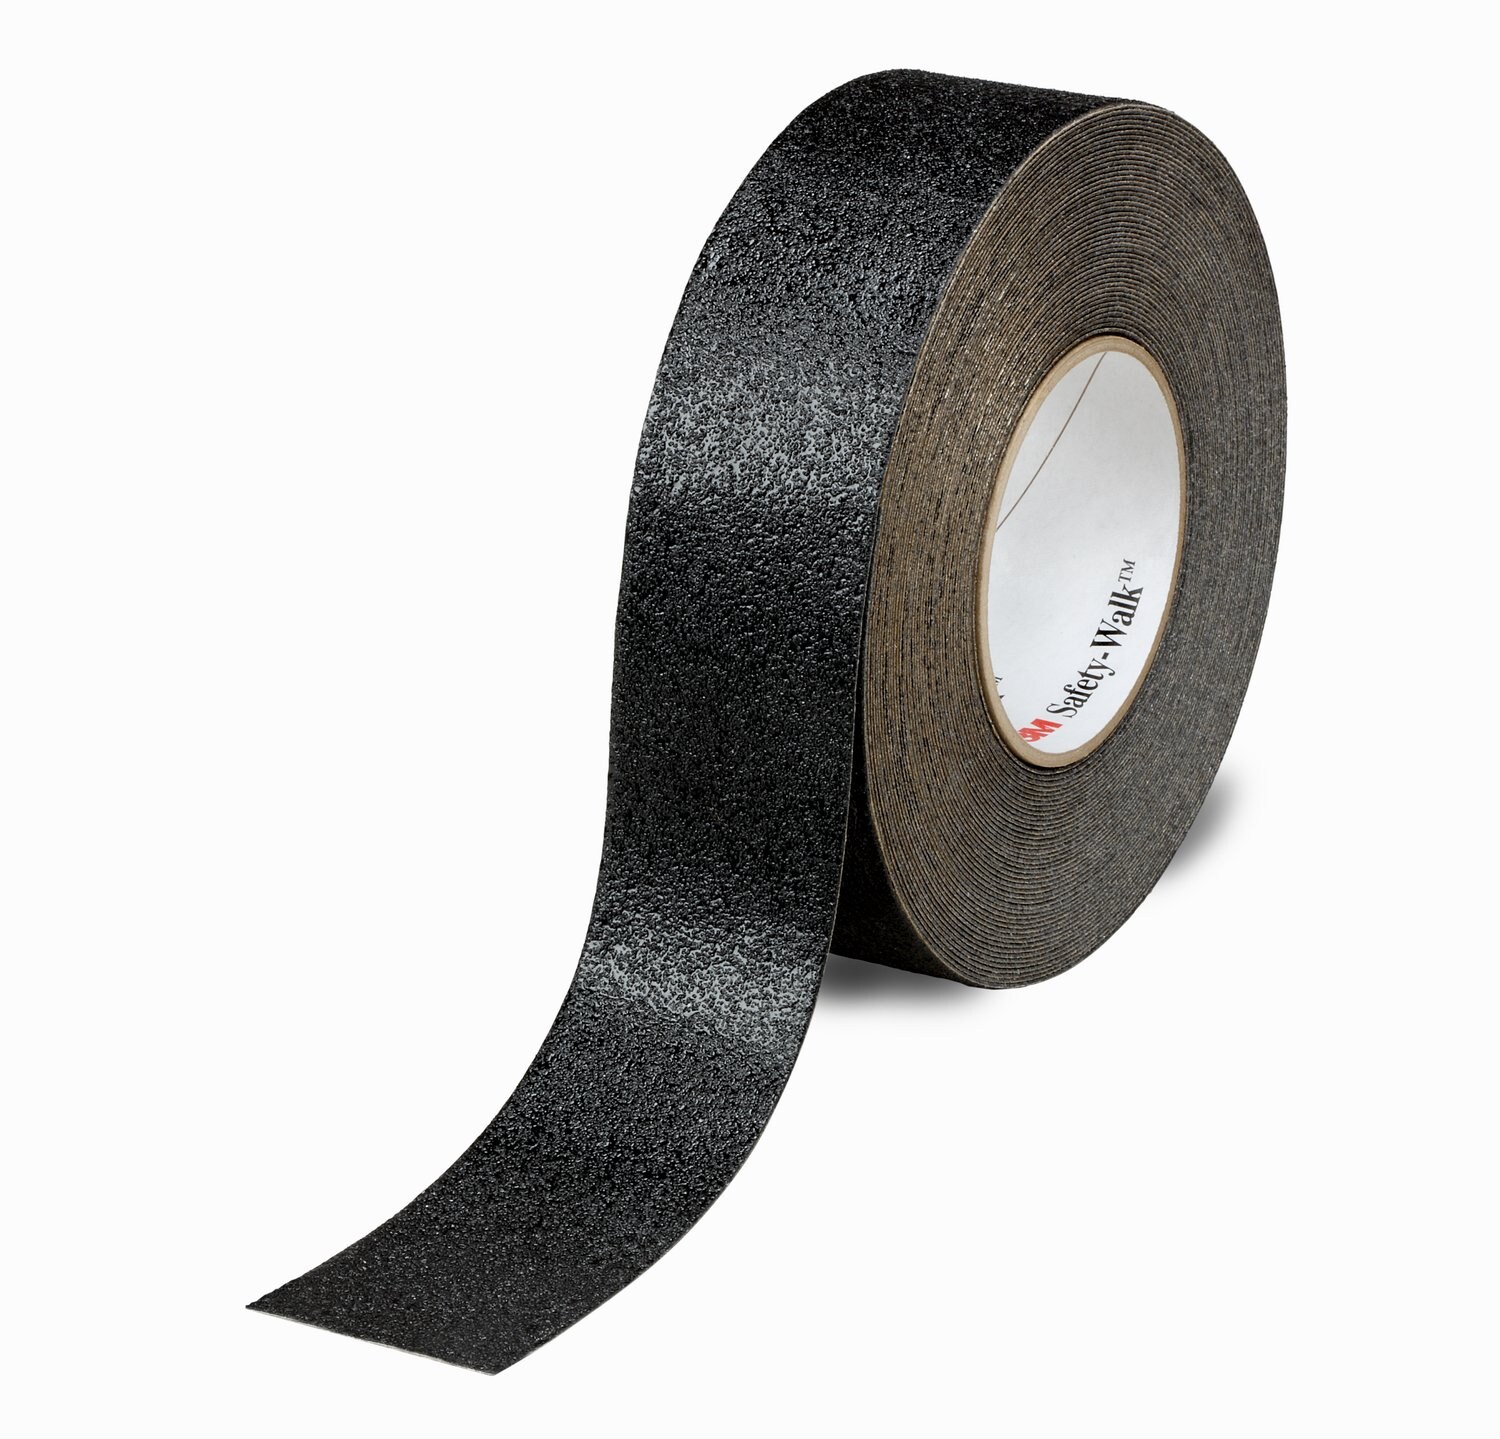 7100196742 - 3M Safety-Walk Slip-Resistant Conformable Tapes & Treads 530, Safety
Yellow, 49.25 x 80 yd